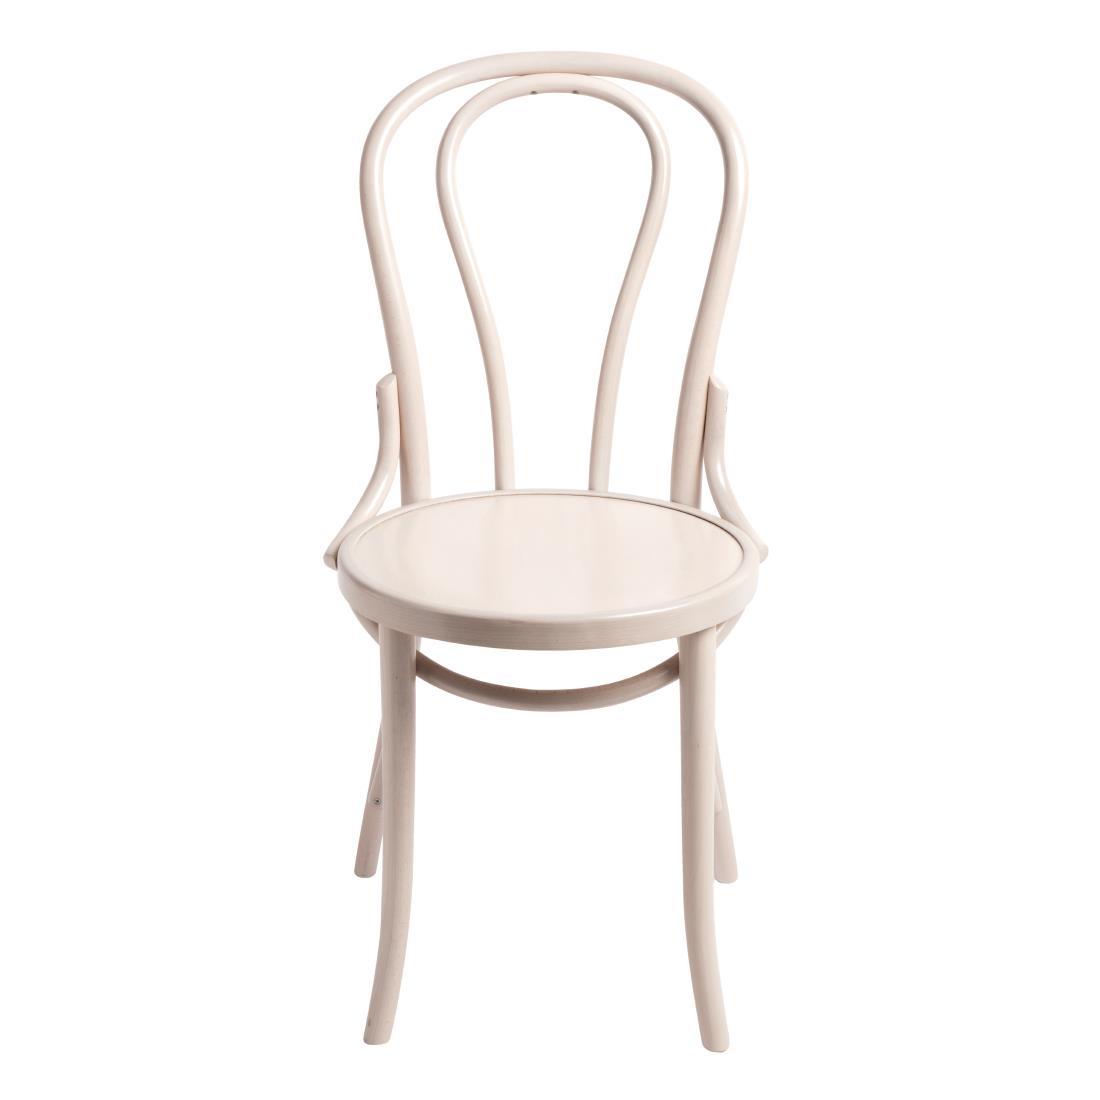 Fameg Bentwood Bistro Side Chairs Whitewash (Pack of 2) - GF968  - 2